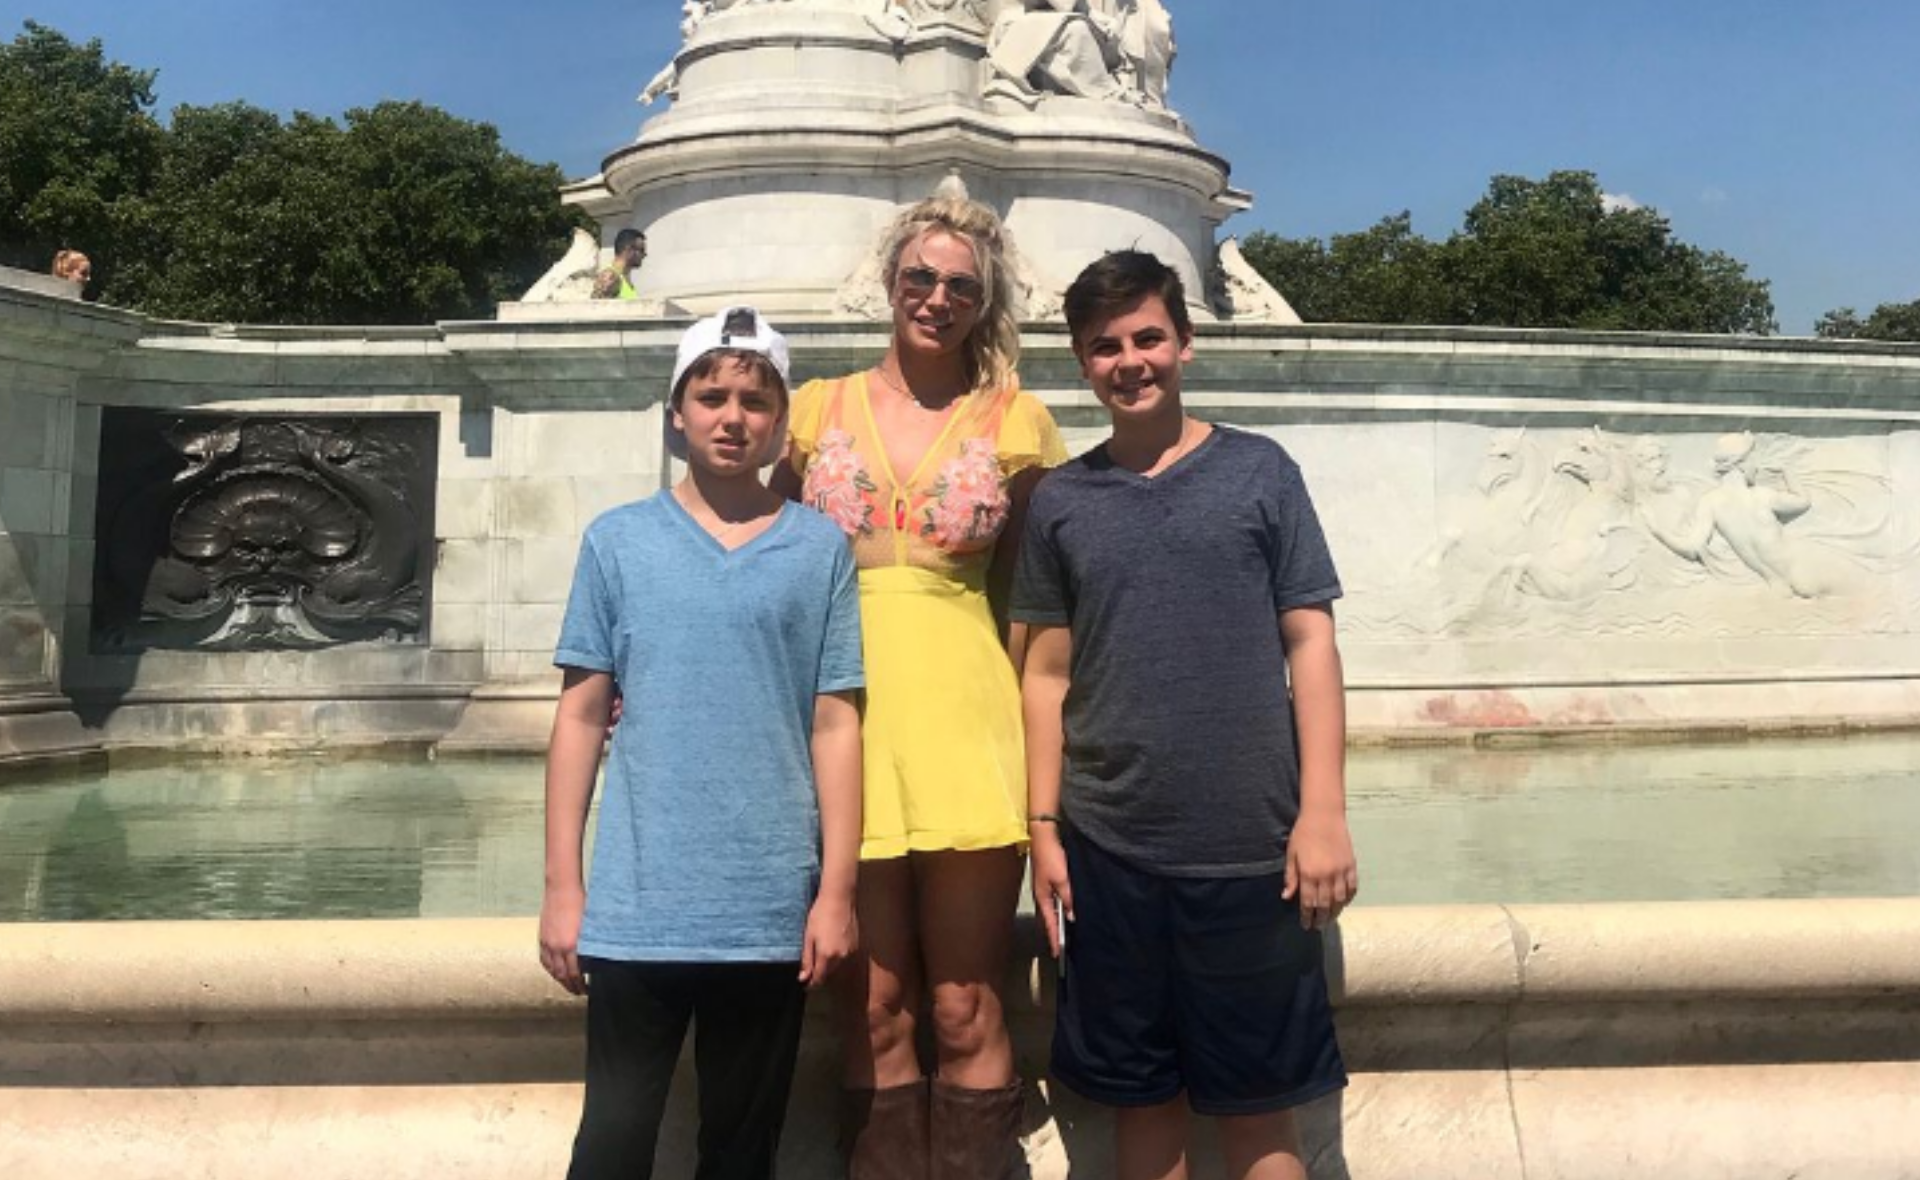 International pop-star and doting mum: Inside Britney Spears relationship with her two sons Sean and Jayden